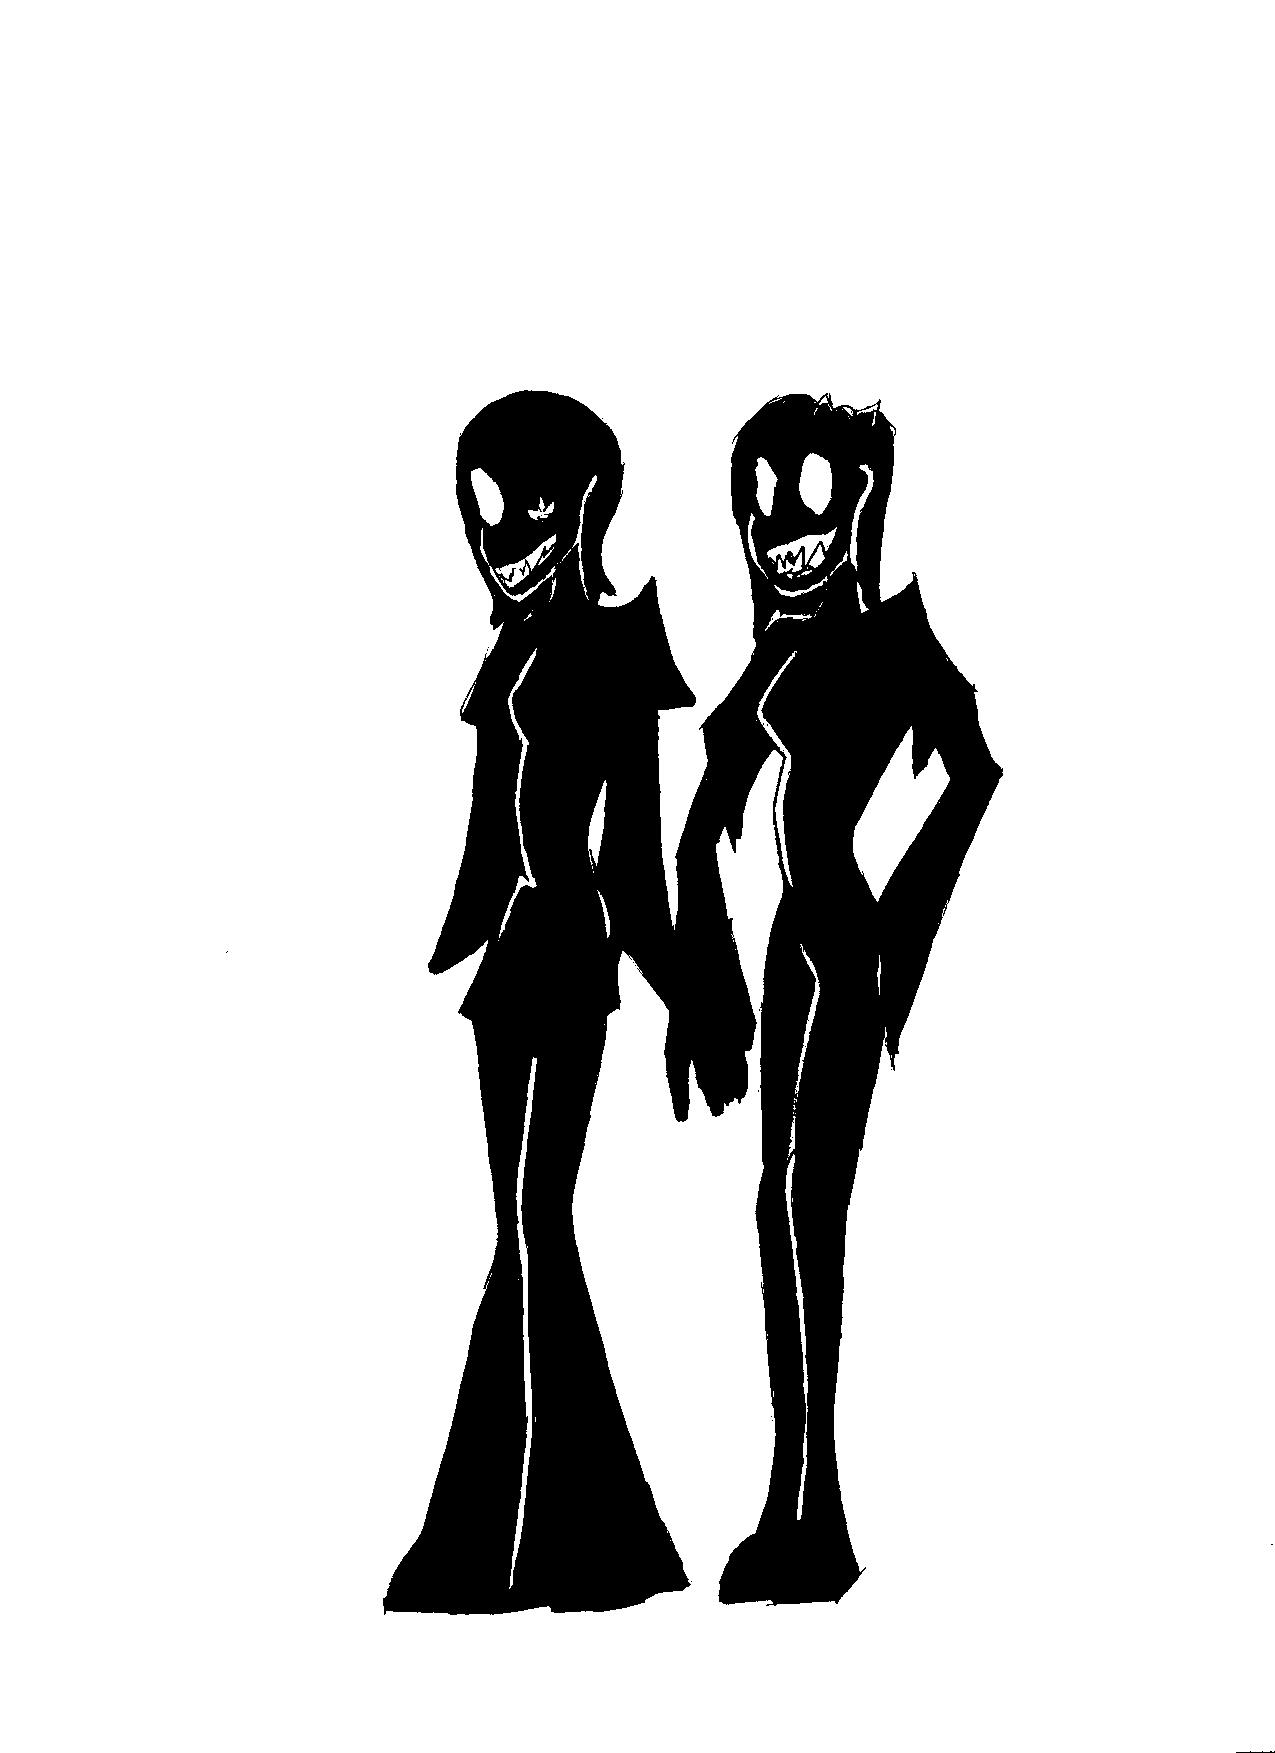 Jess n' me Shadow creatures by Insight